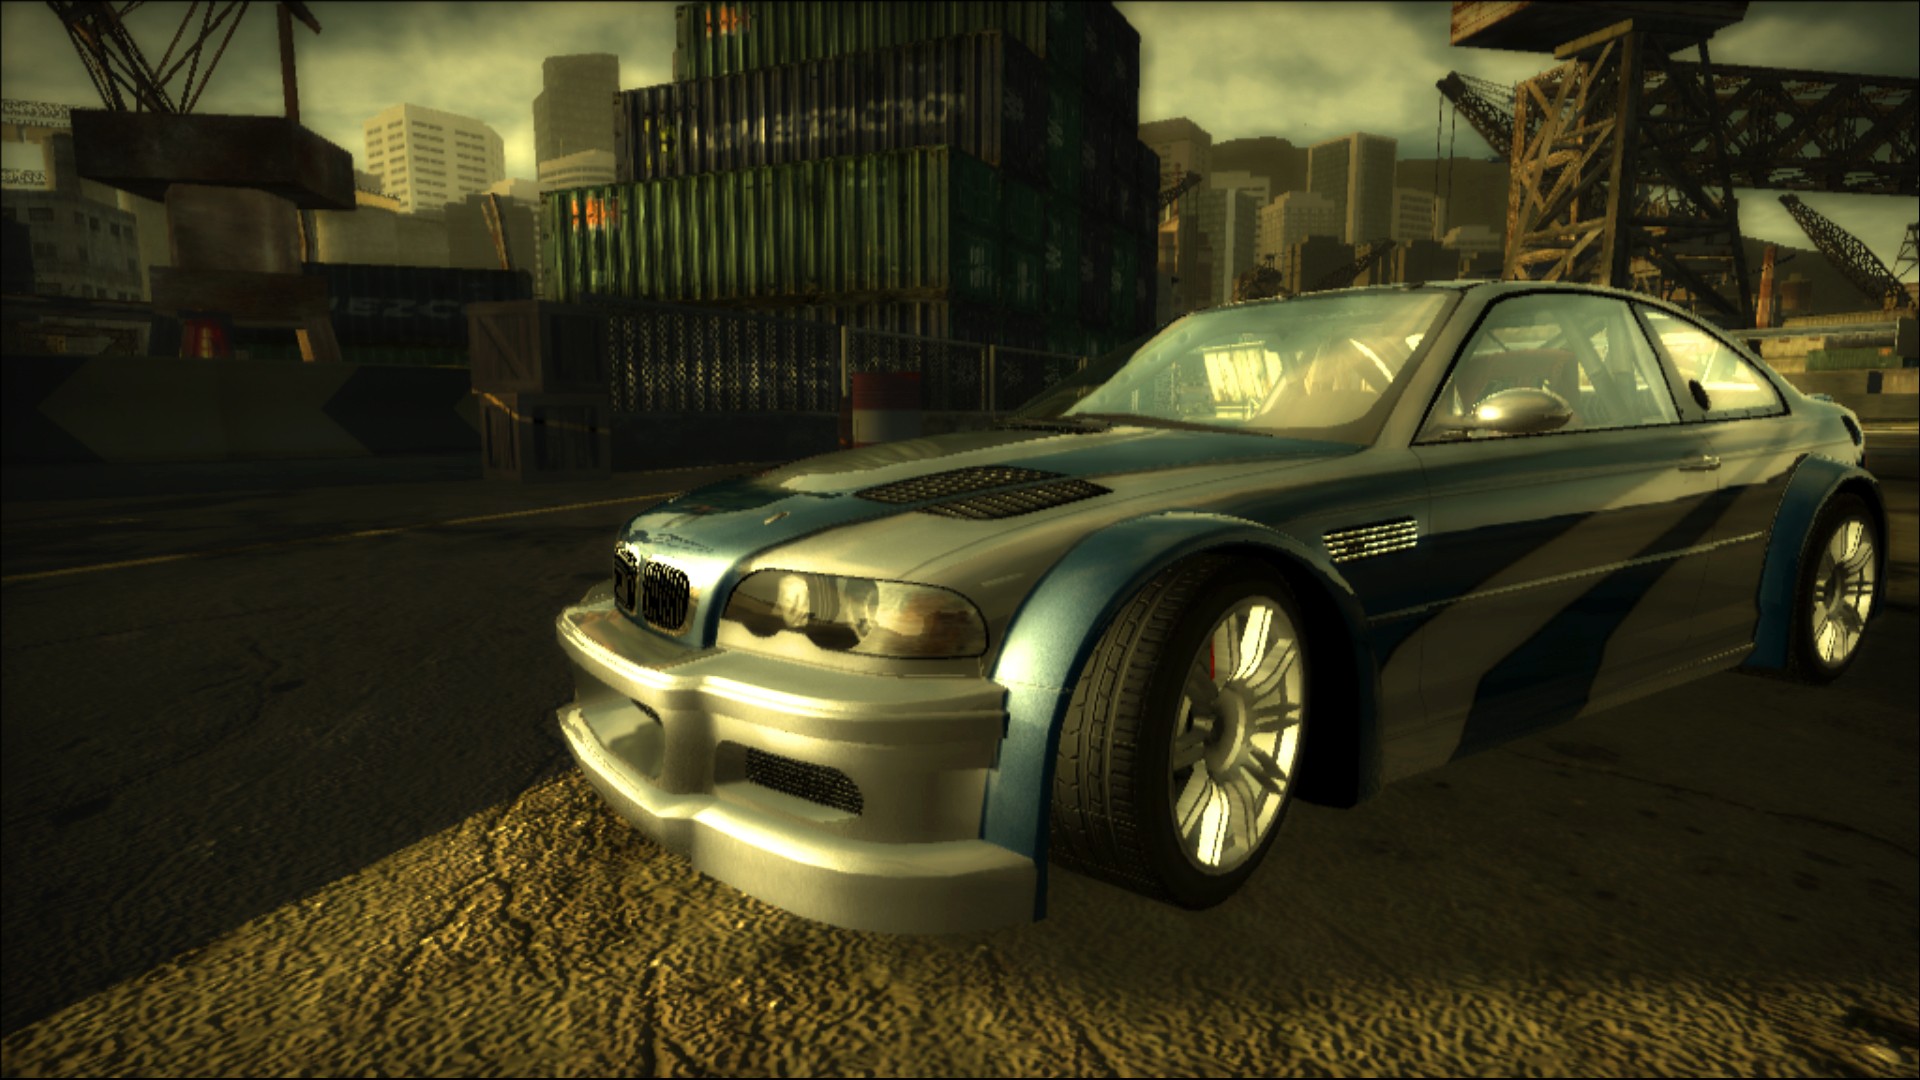 Need for speed most wanted песни. Need for Speed most wanted 2005. Игра NFS most wanted 2005. NFS most wanted 2005 мост. BMW m3 GTR.